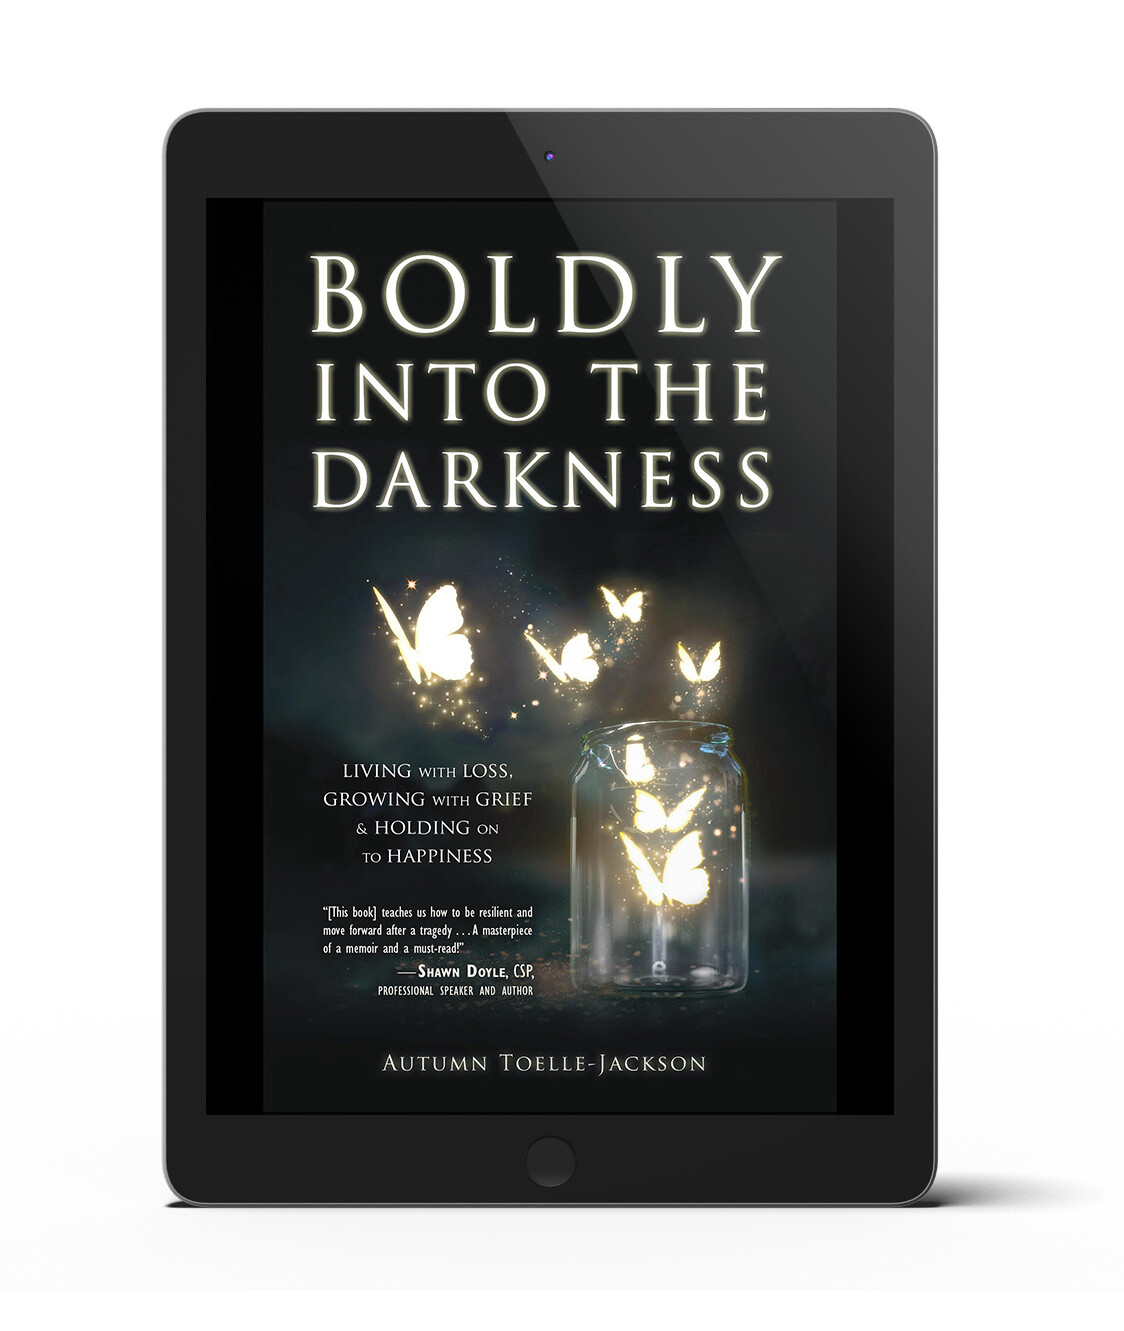 Boldly into the Darkness: Living with Loss, Growing with Grief & Holding onto Happiness (ebook)